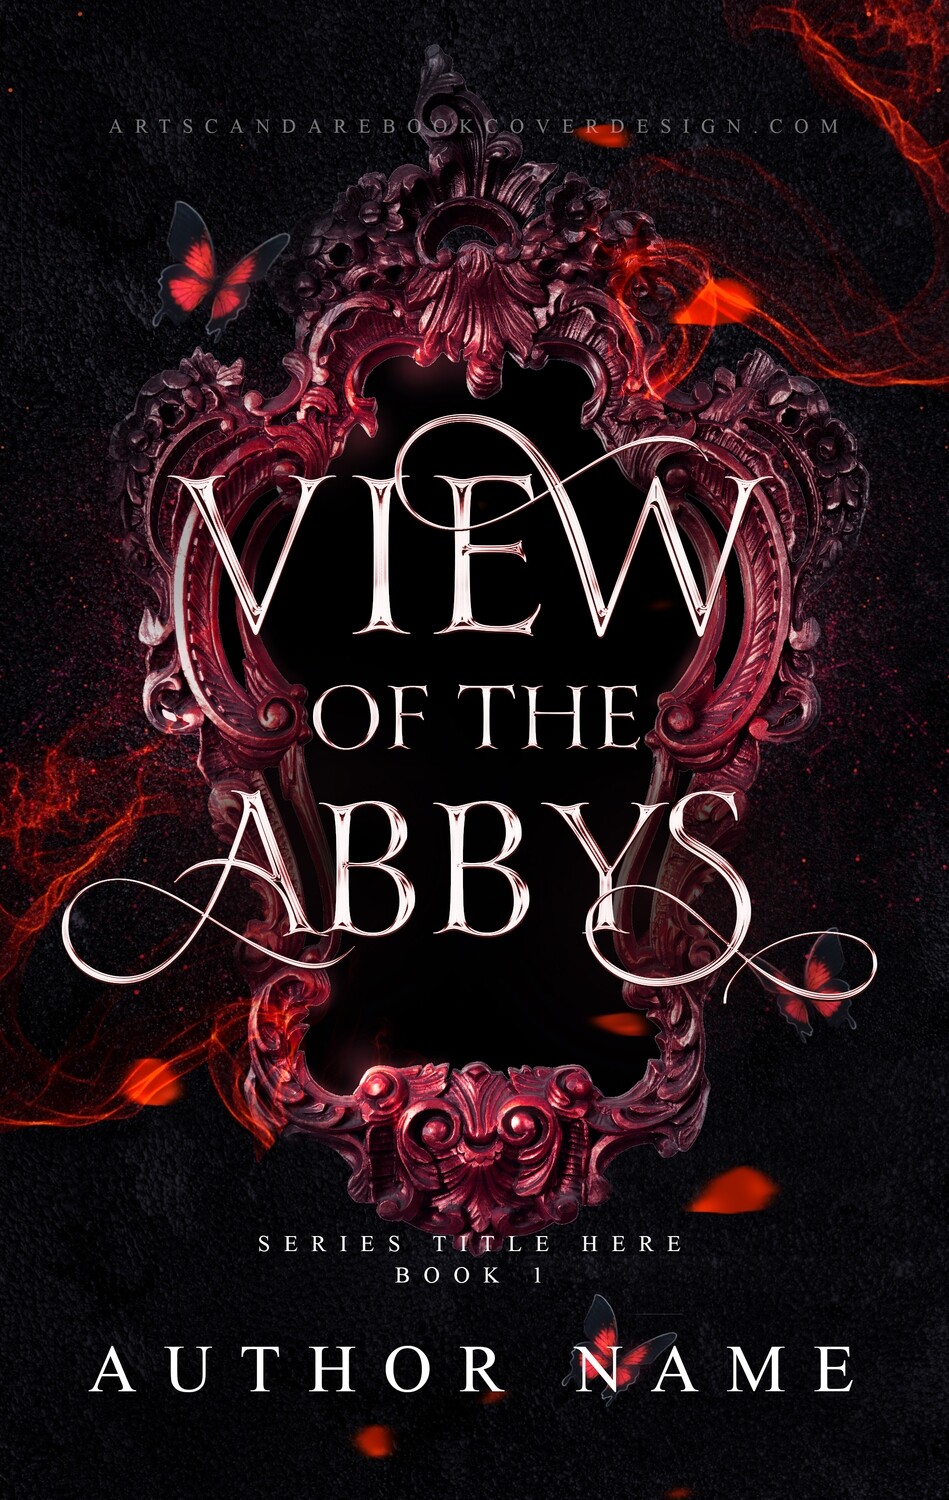 VIEW OF THE ABBYS